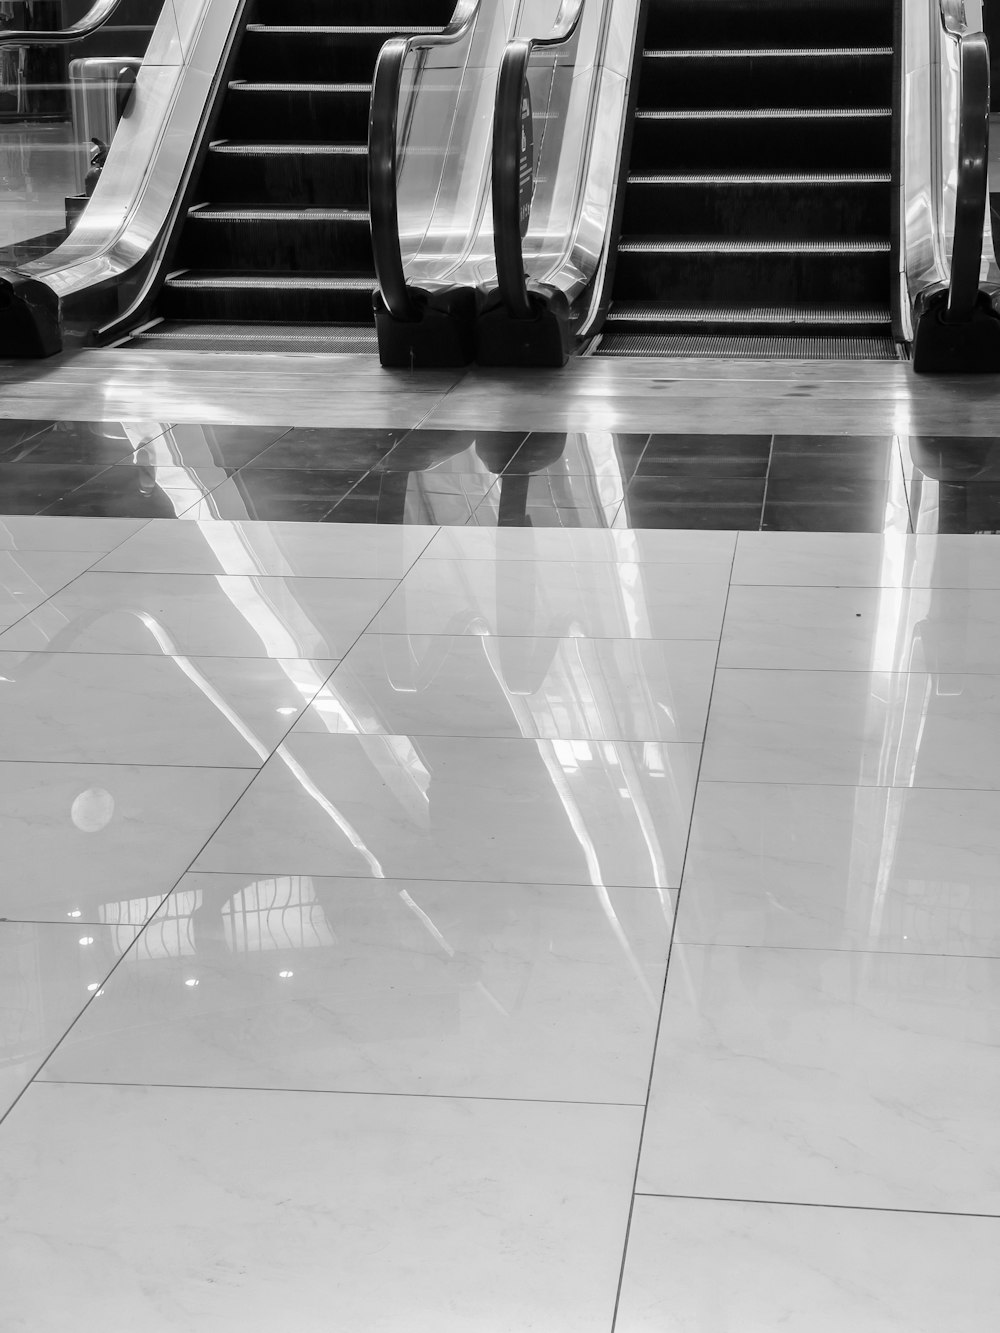 a black and white photo of escalators and stairs